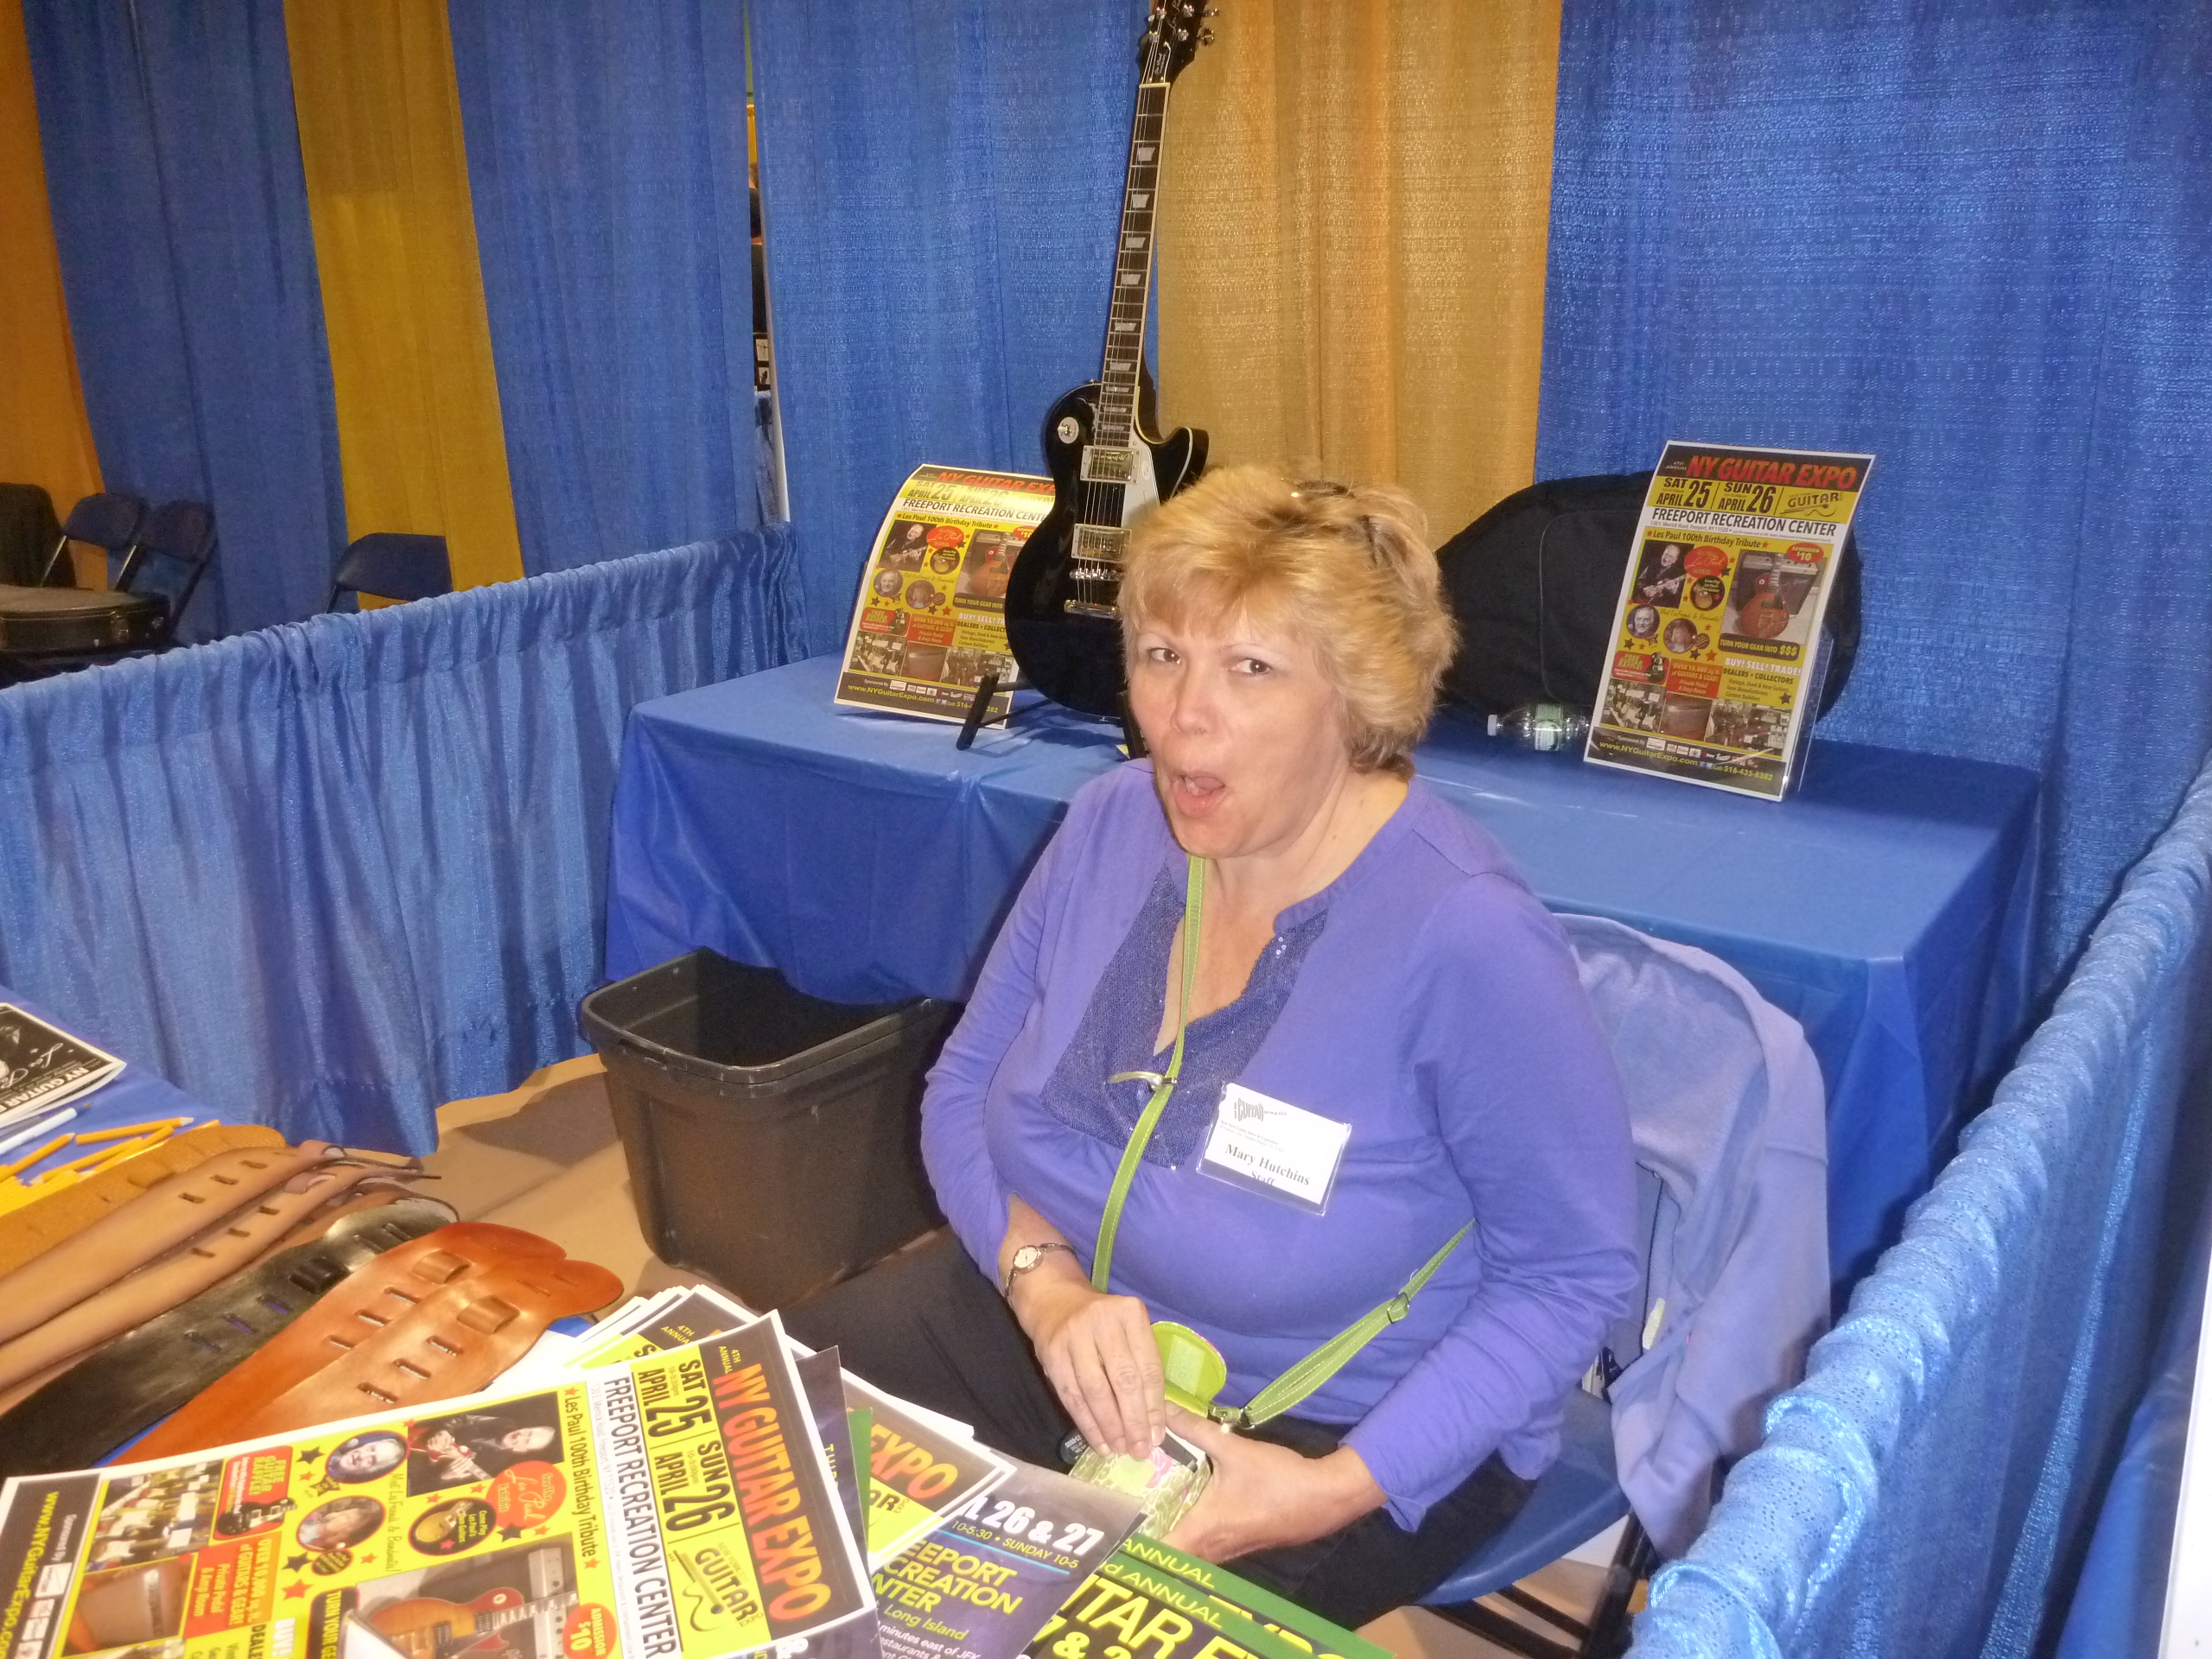 NY Guitar Show staffer Mary Hutchins surprised by the camera in the Free Guitar giveaway booth.